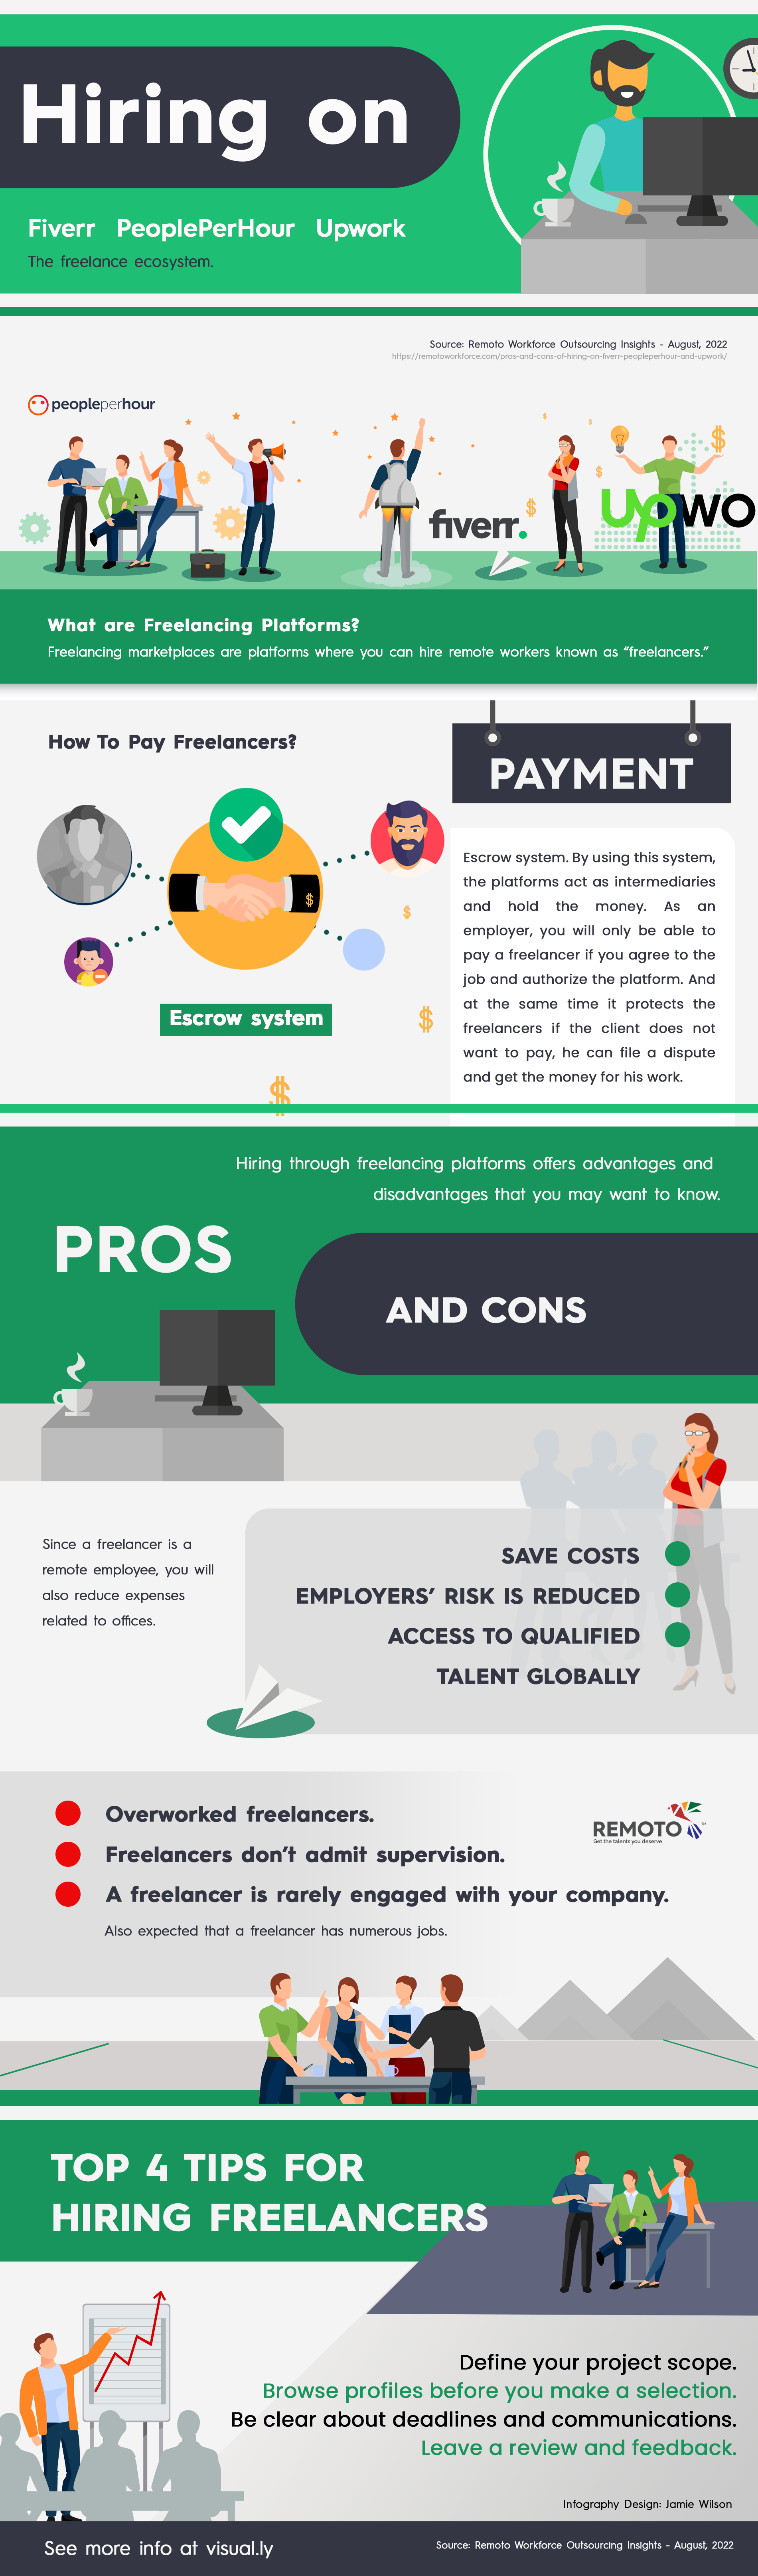 Pros and Cons of Hiring on Fiverr, PeoplePerHour, and Upwork